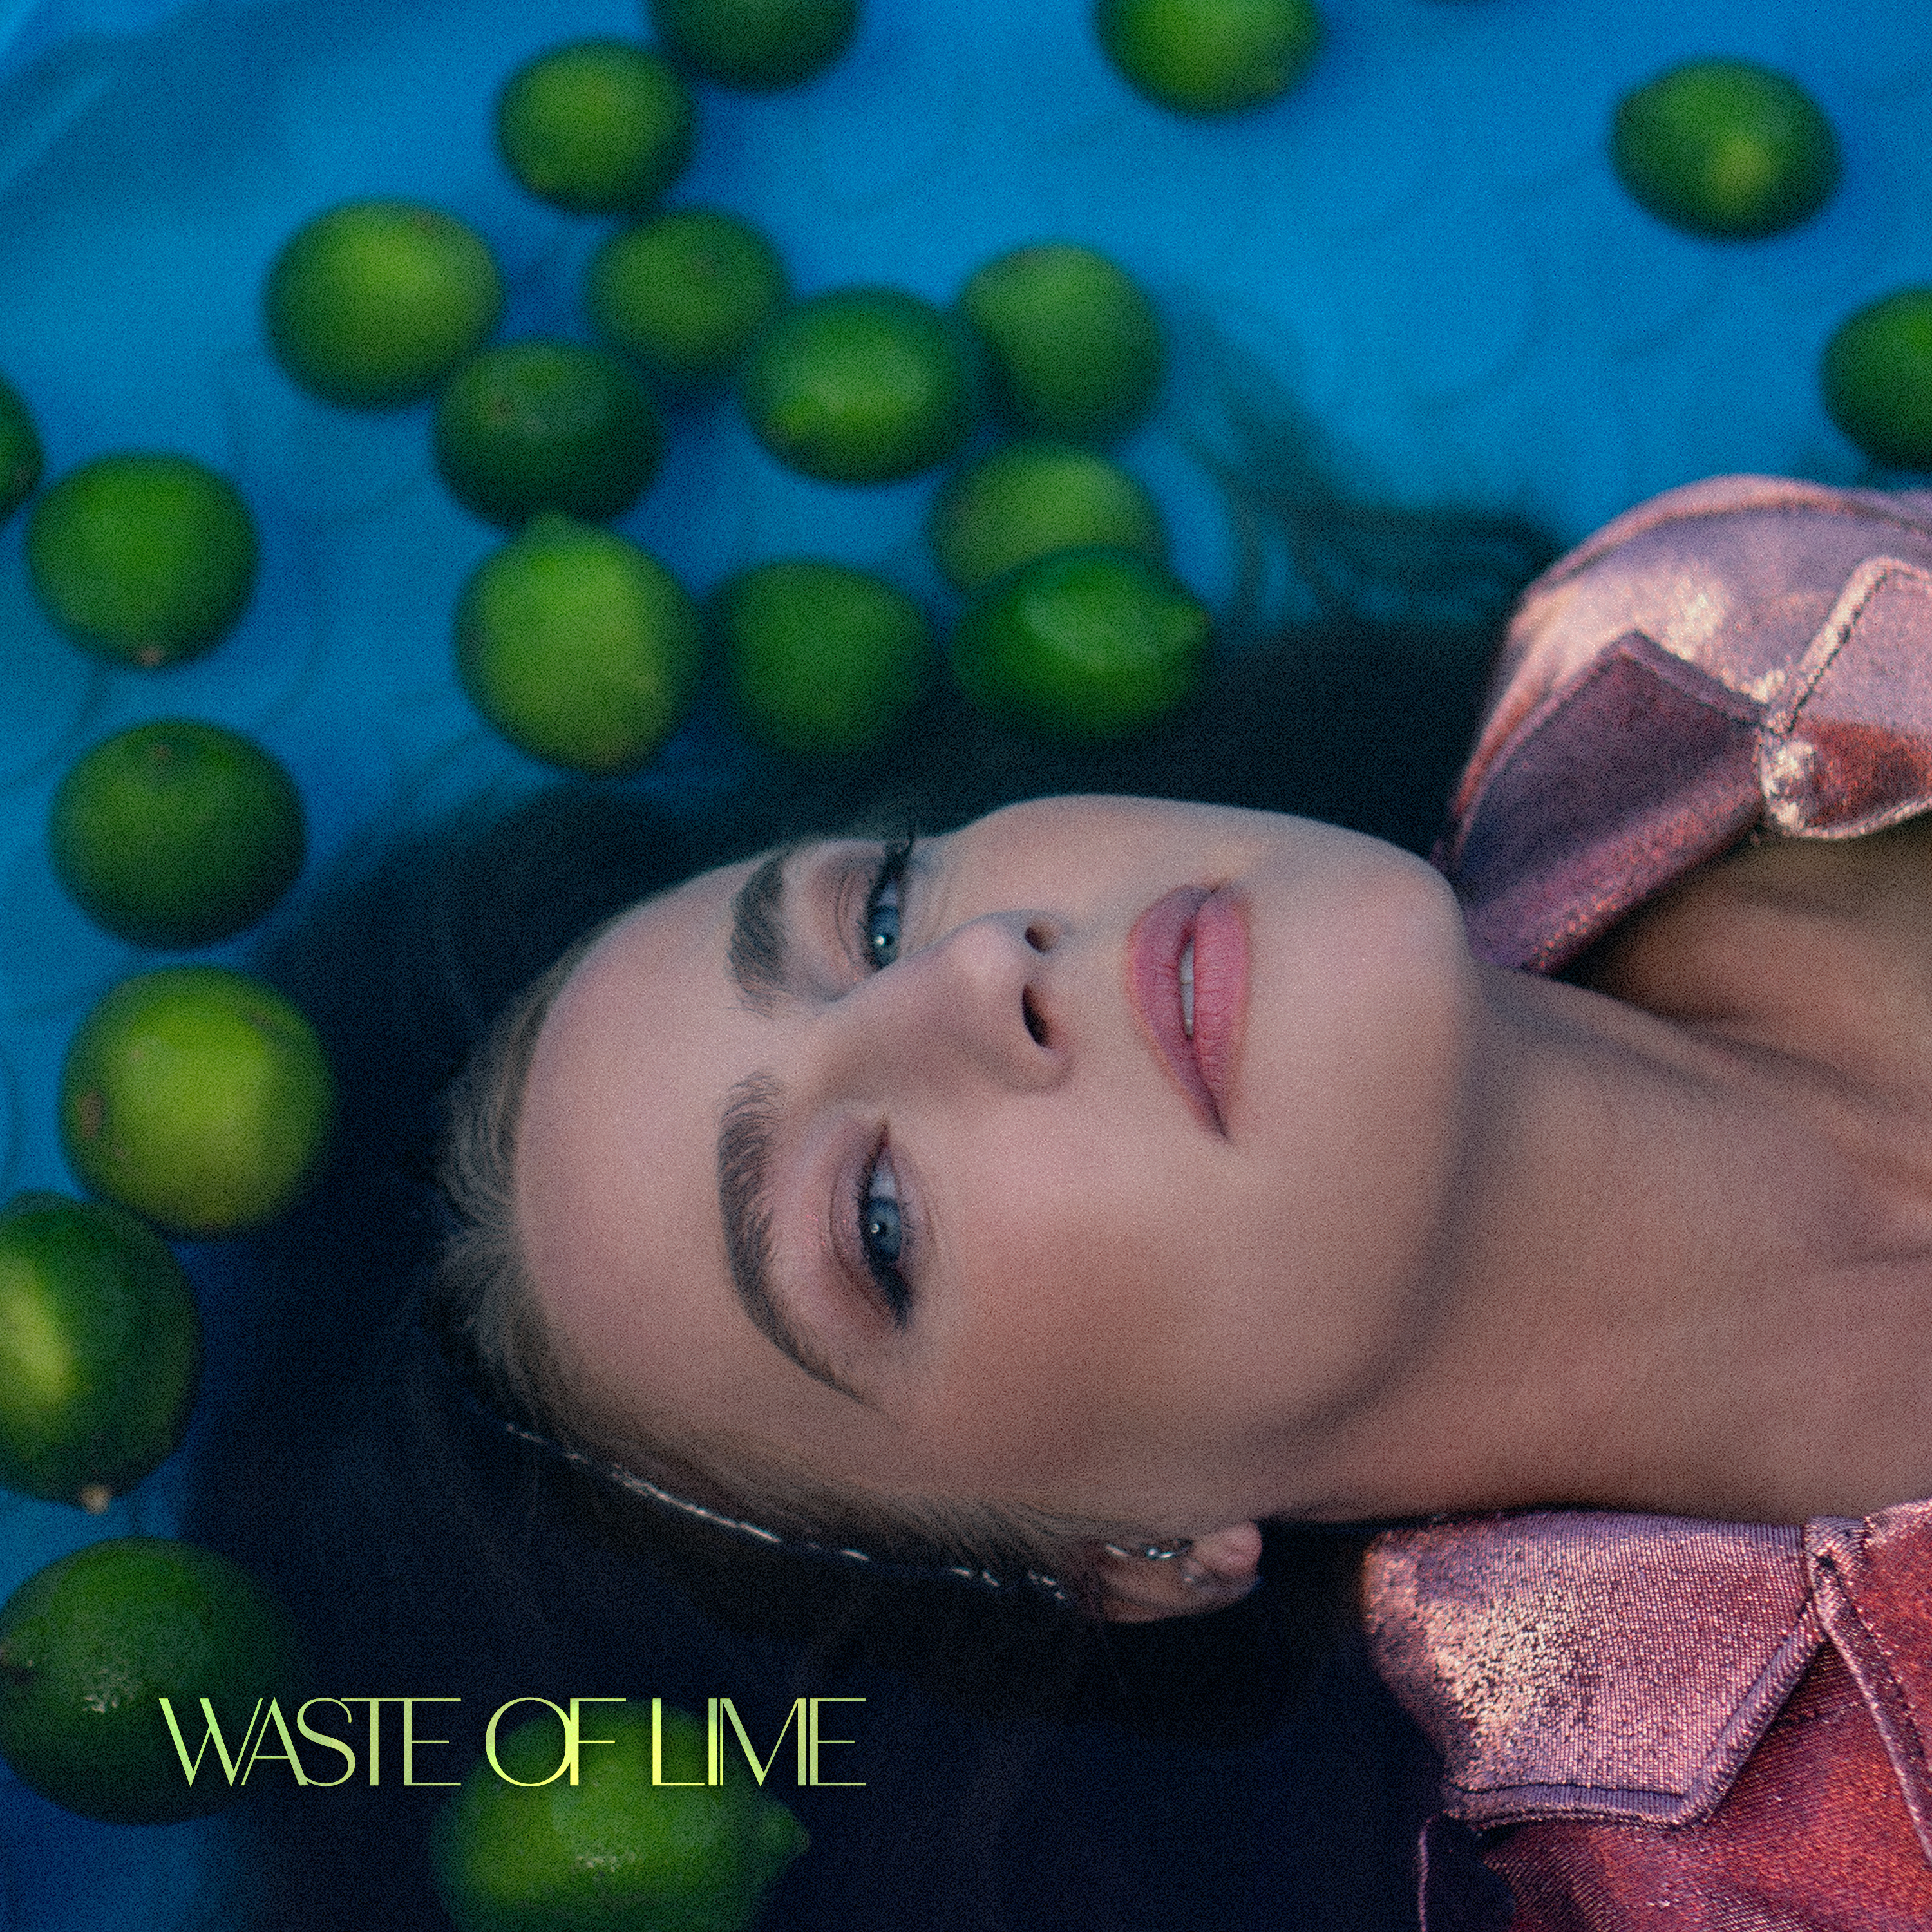 INGRID ANDRESS CHANNELS THE BEACH BOYS IN BRAND NEW SONG "WASTE OF LIME"